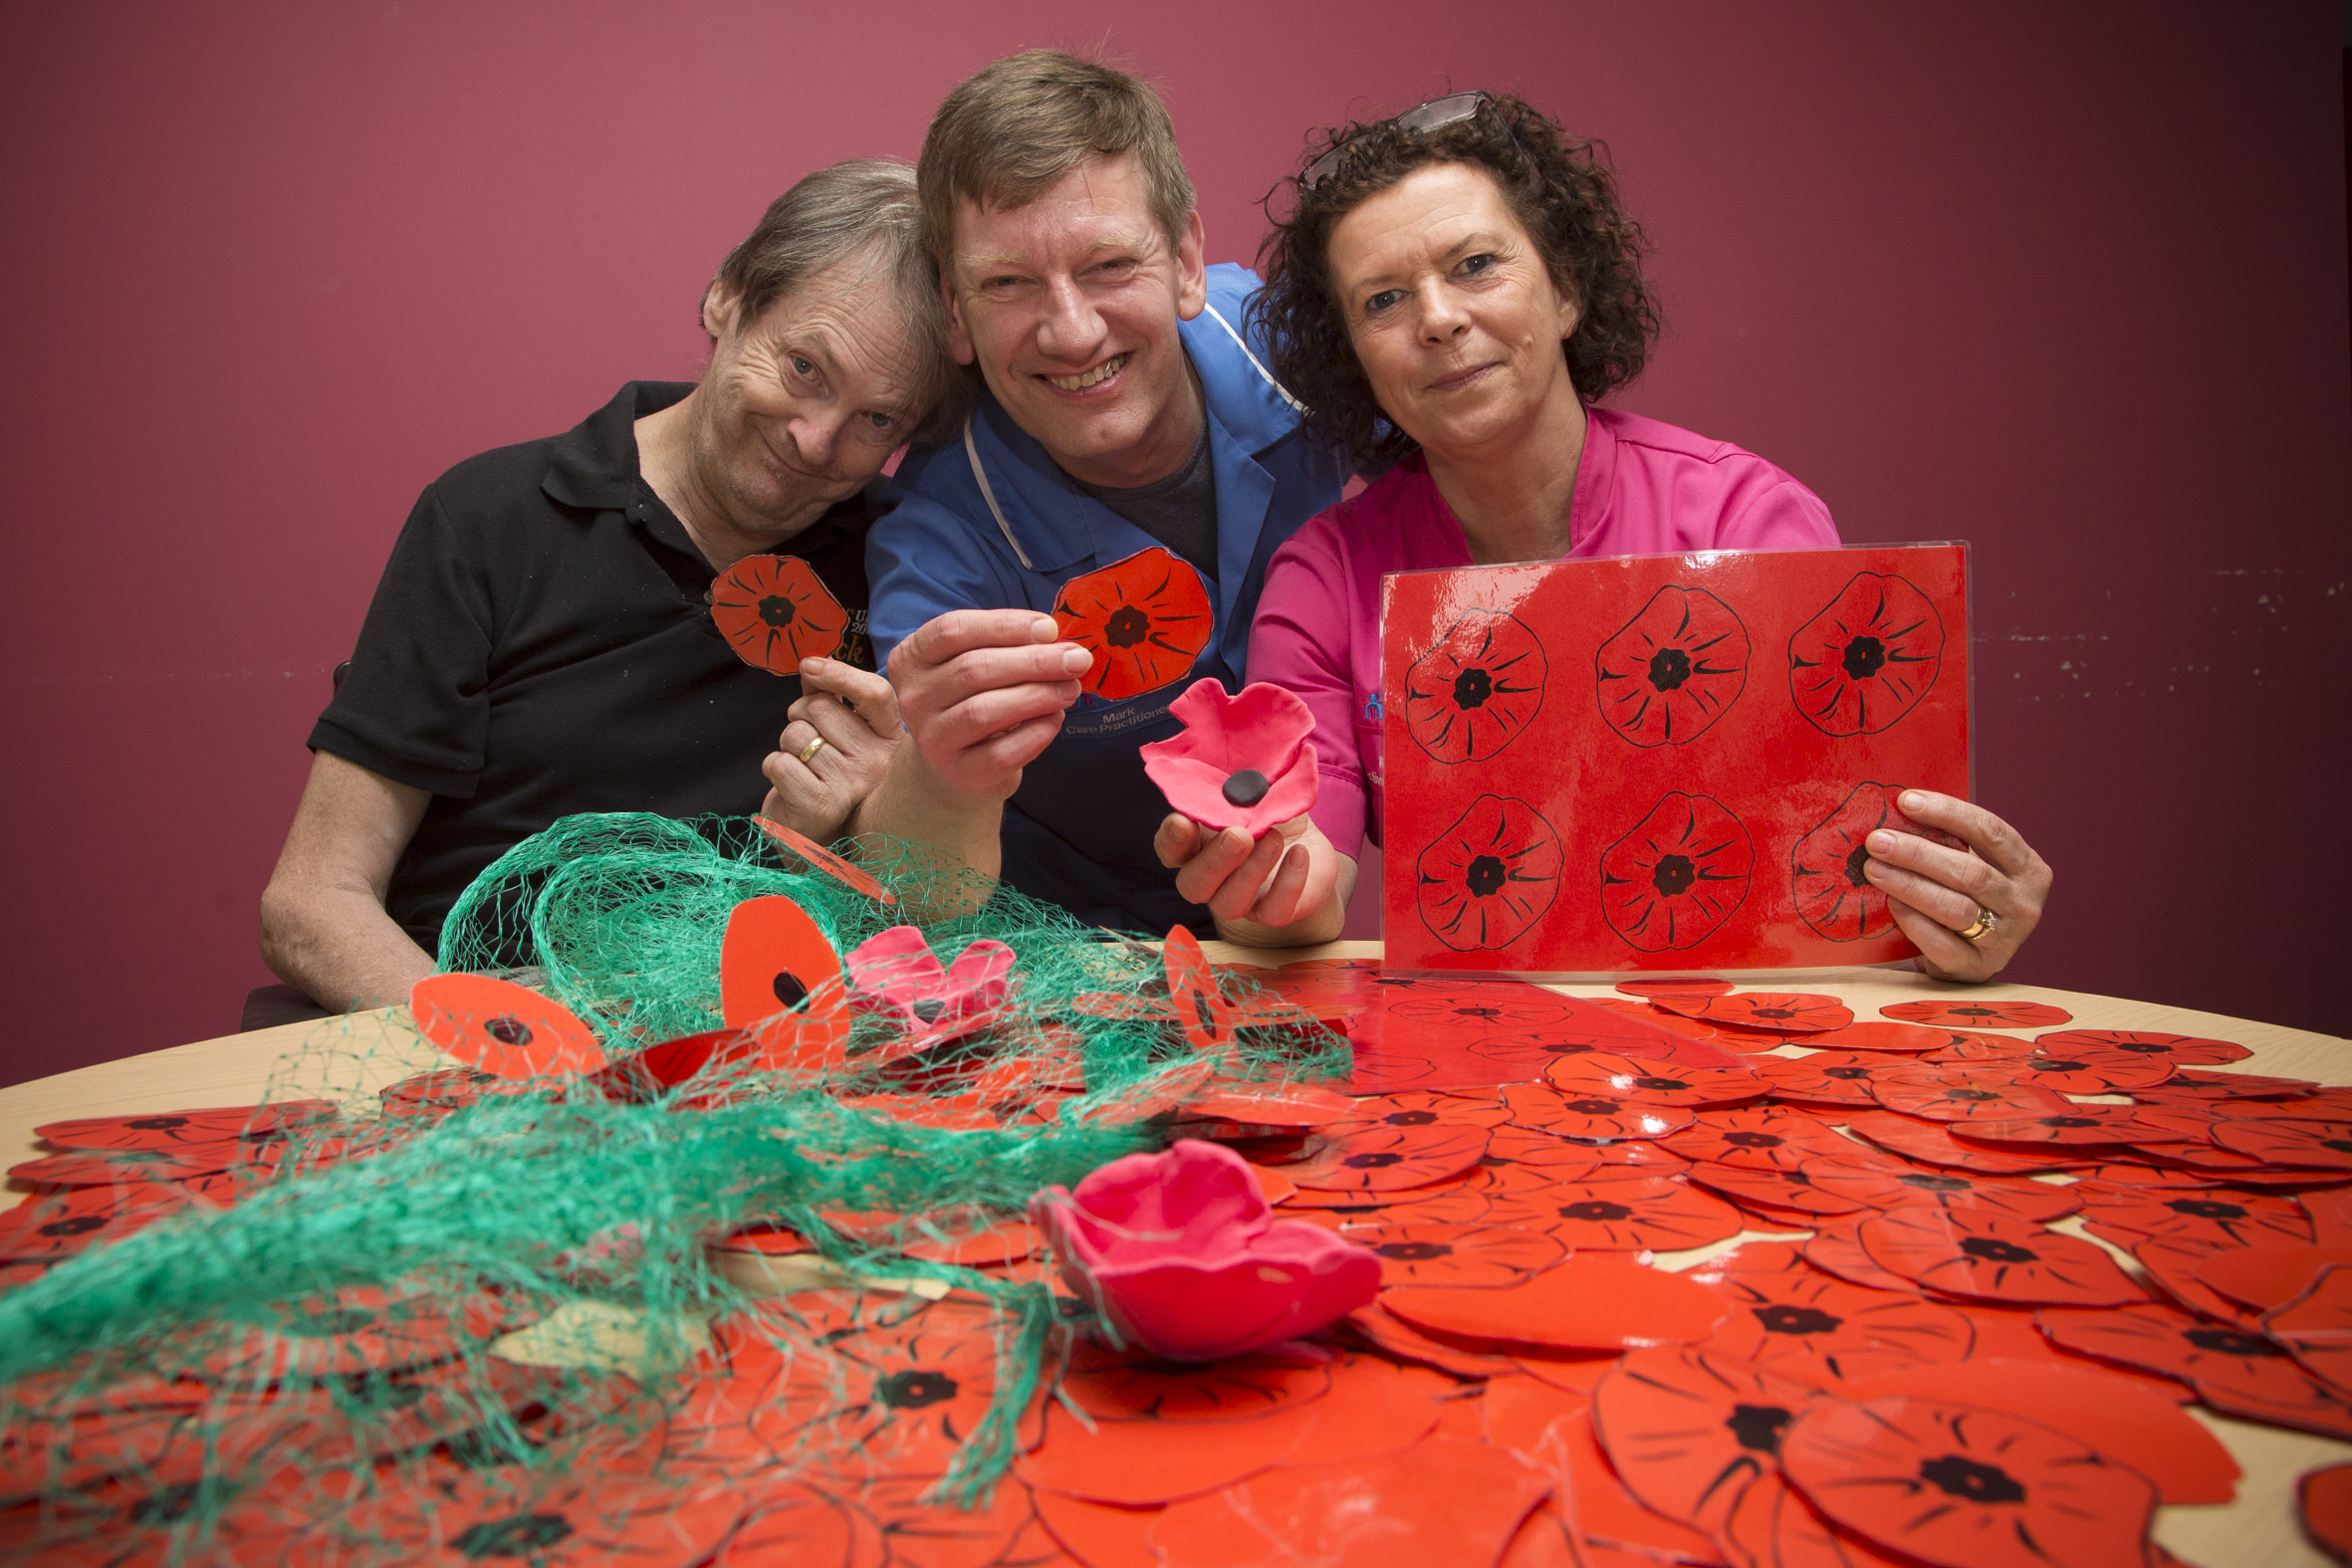 Care home residents create weeping wall of 1,500 poppies